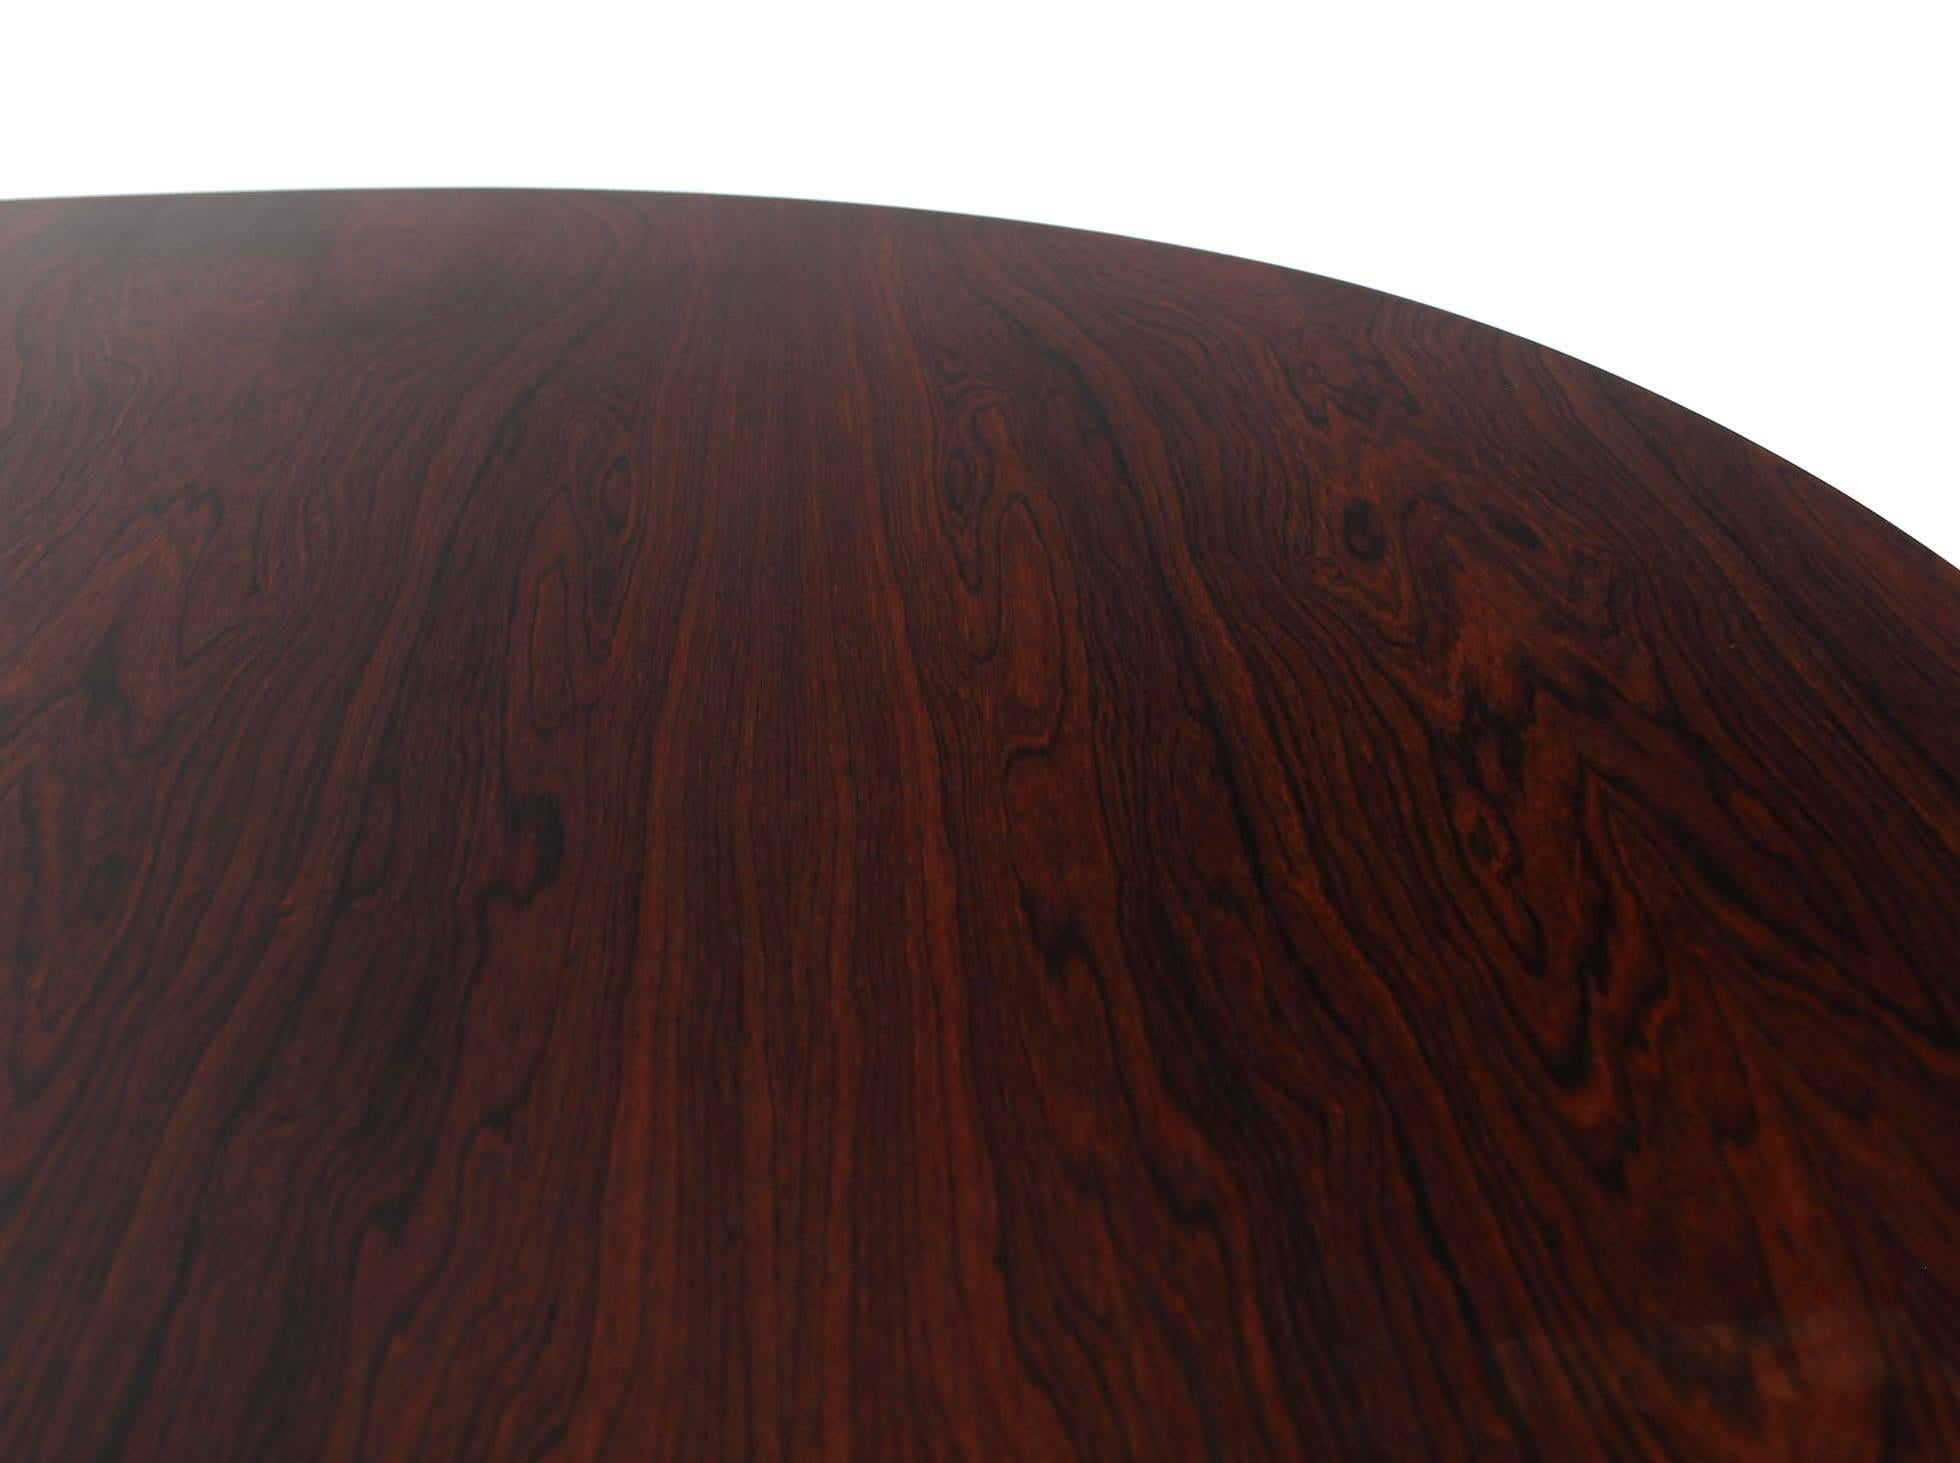 20th Century Oval Rosewood Dining Table on Tapered Horn-Shaped Legs Harvey Probber